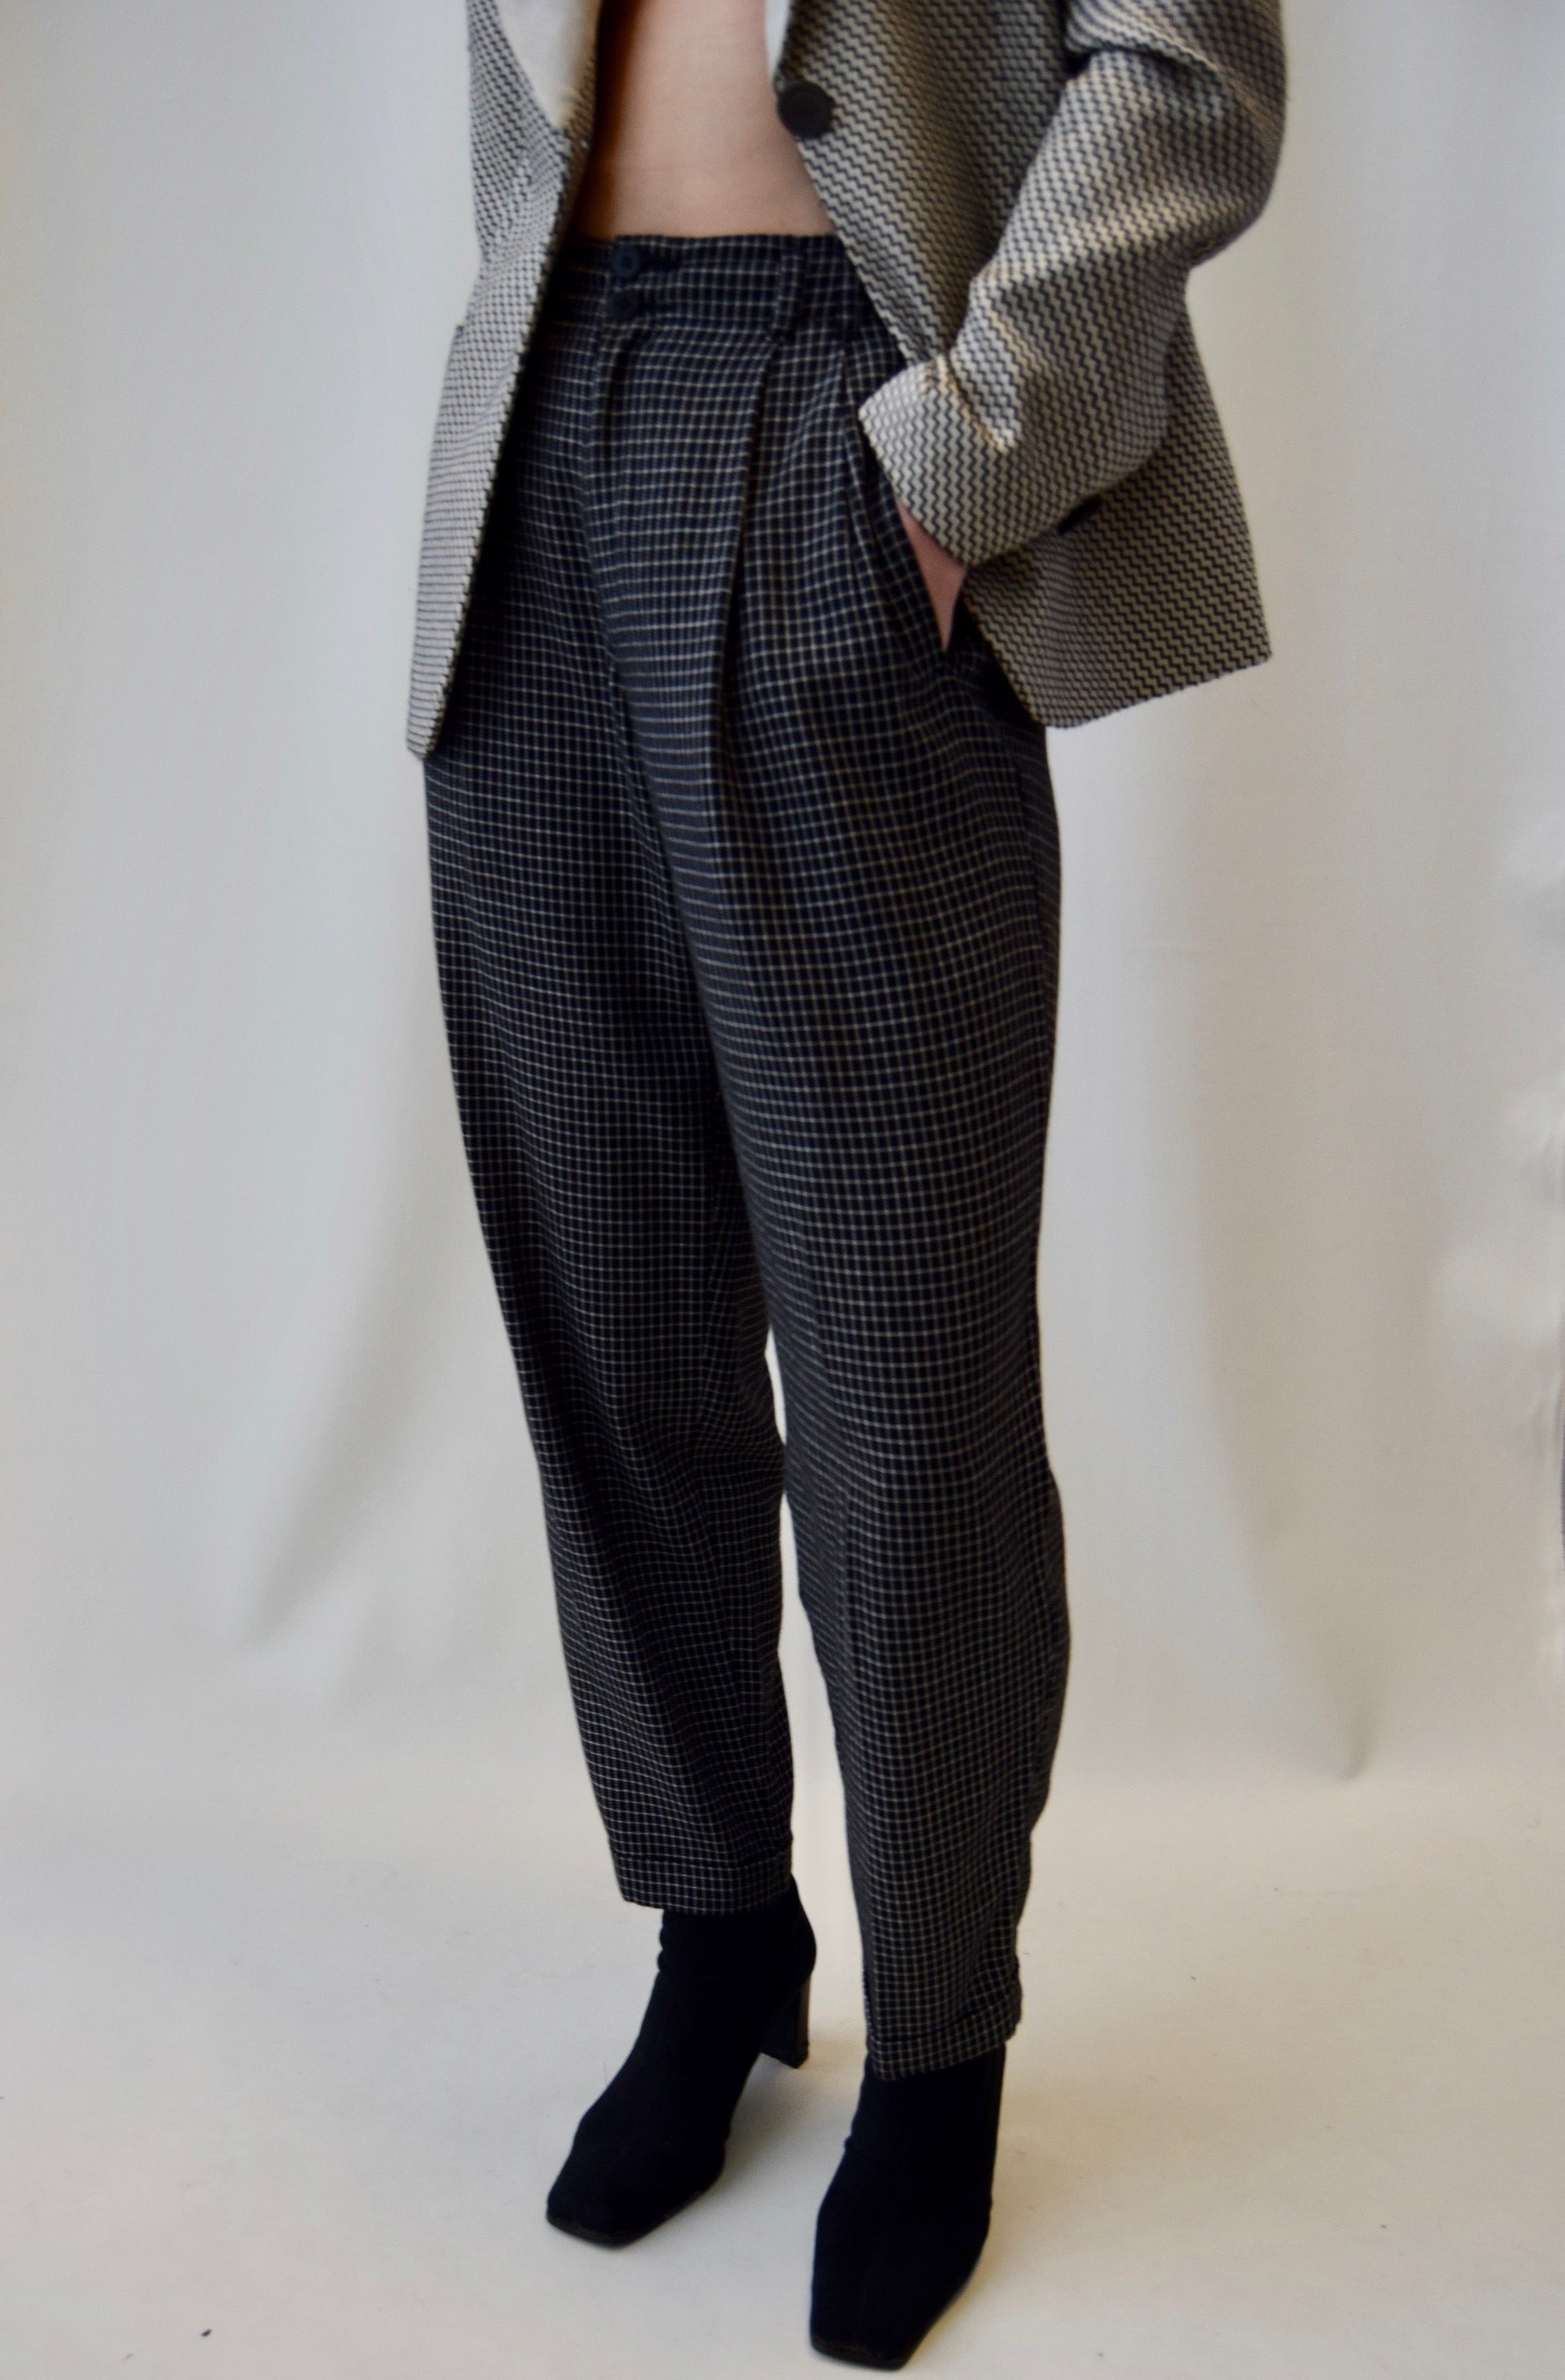 Black & White Grid Patterned Rayon Trousers